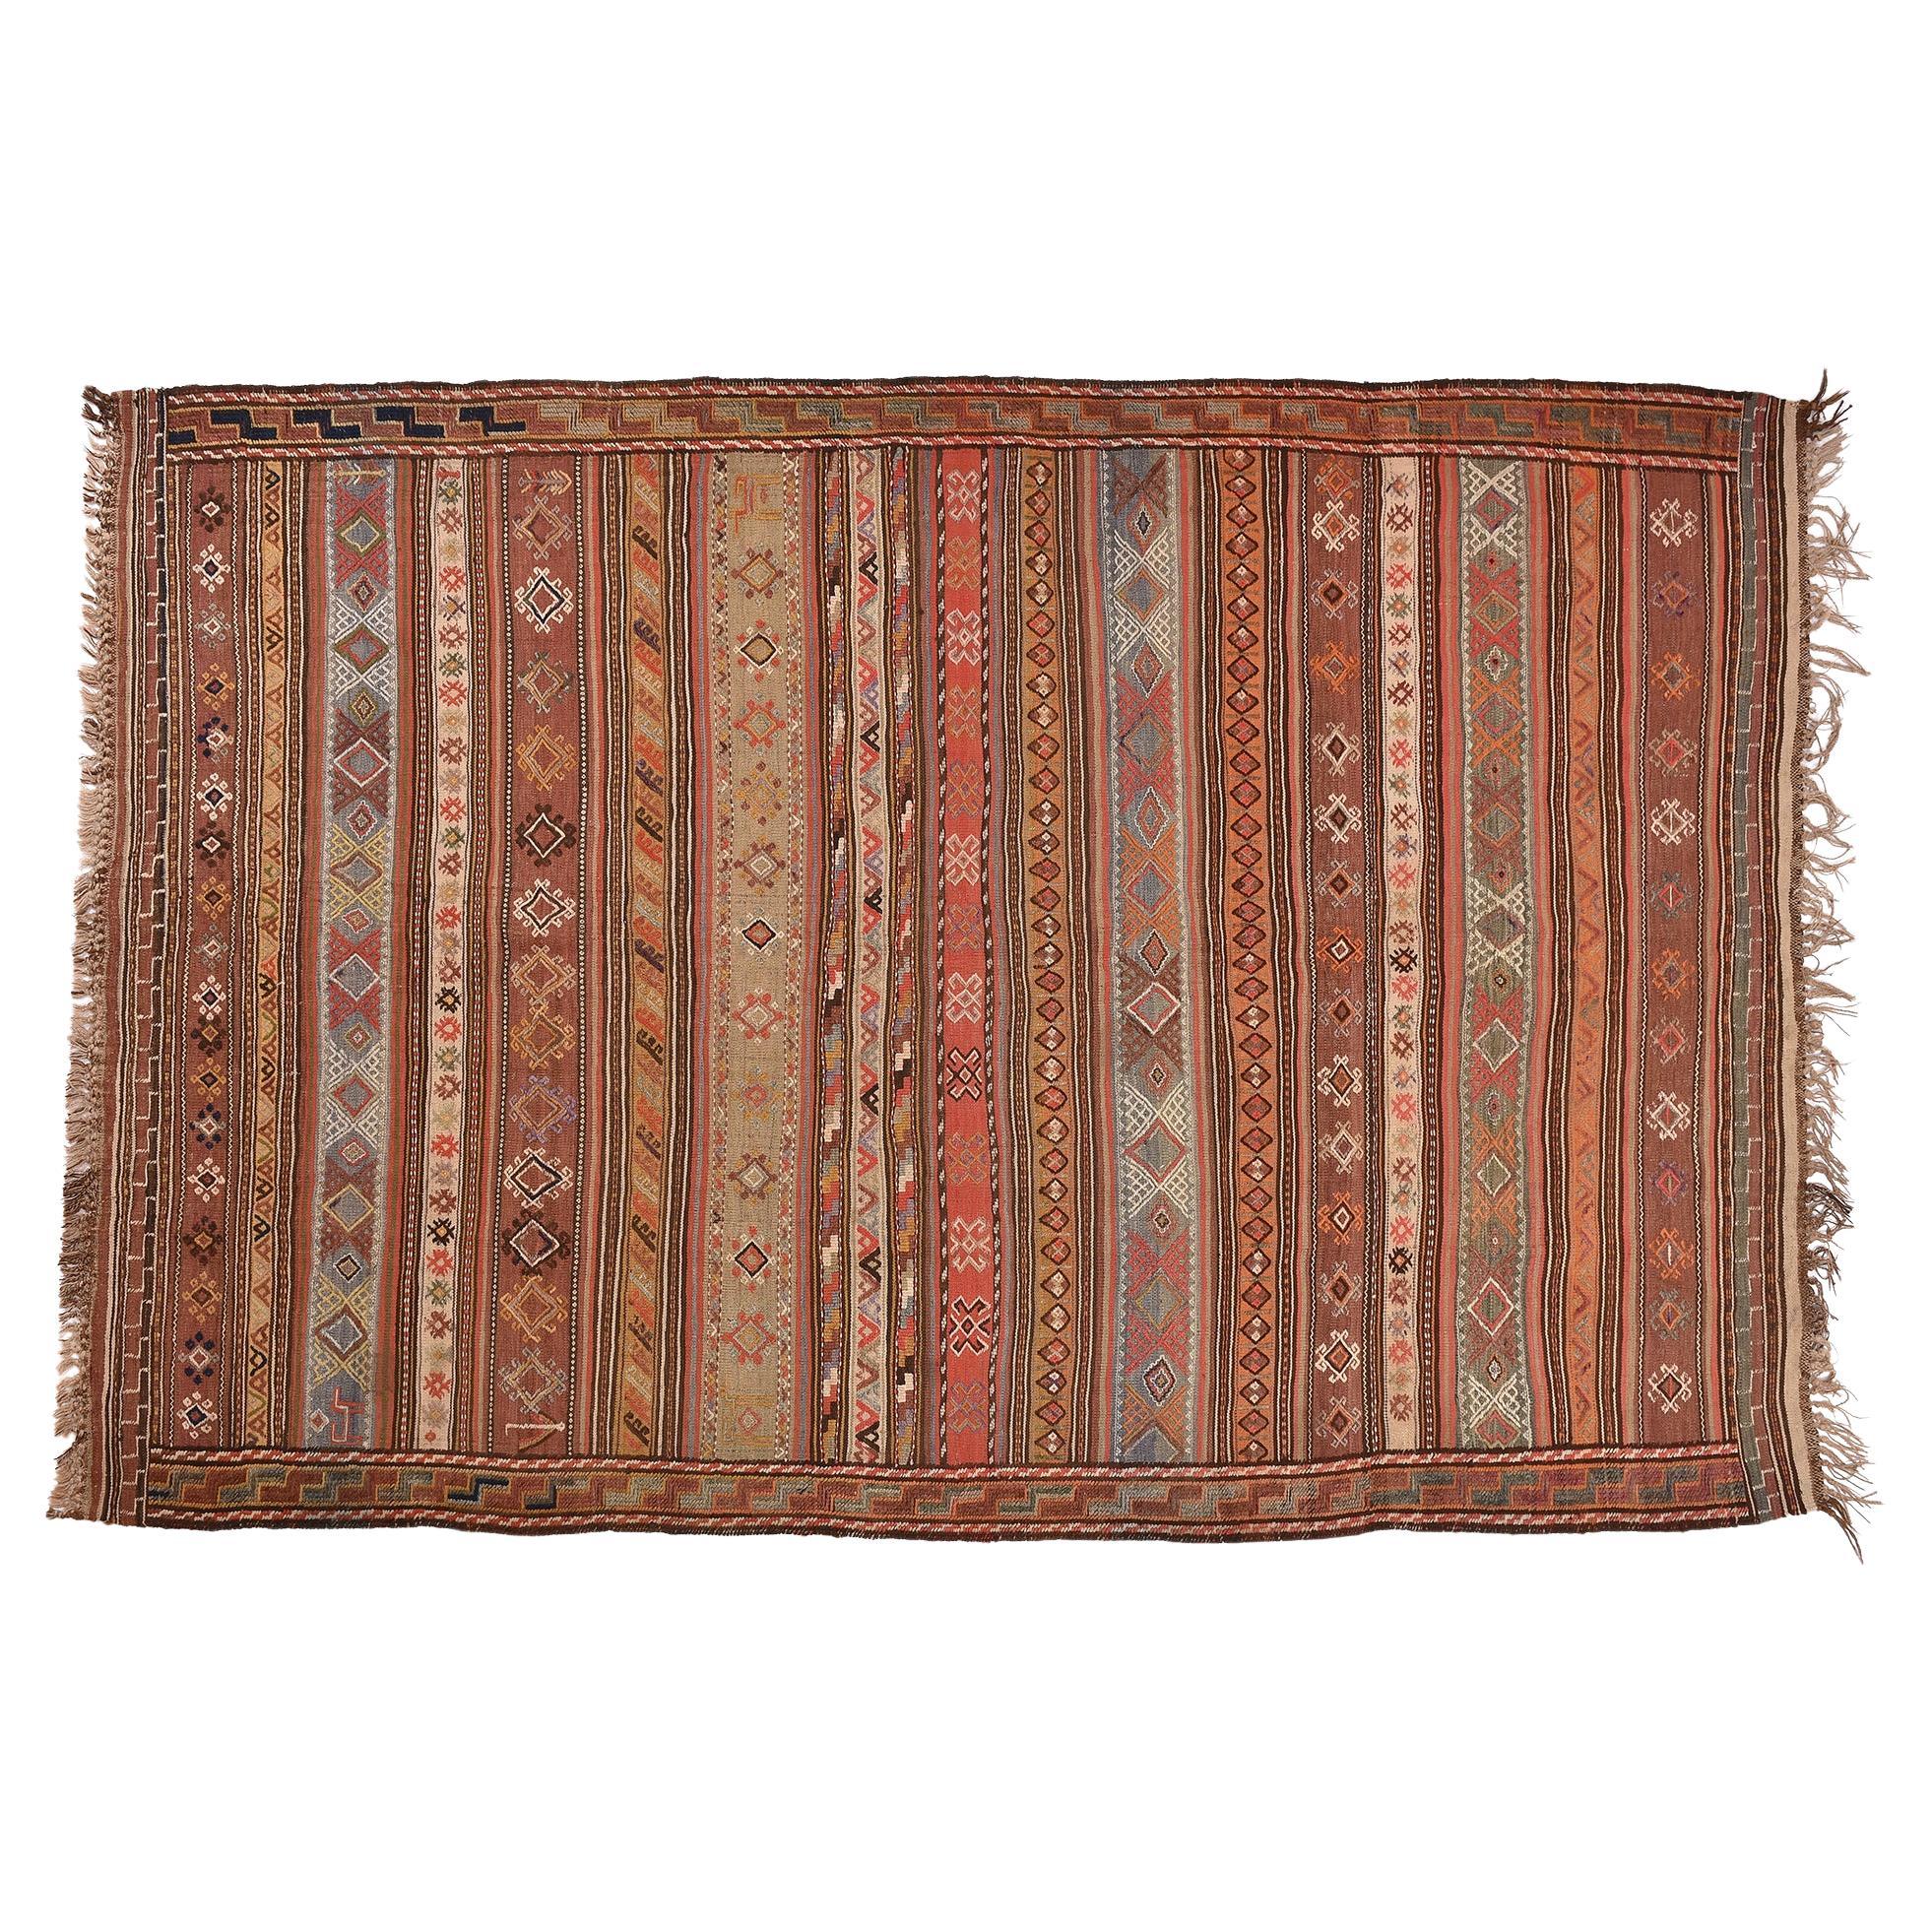 Primitive Central Asian Rugs